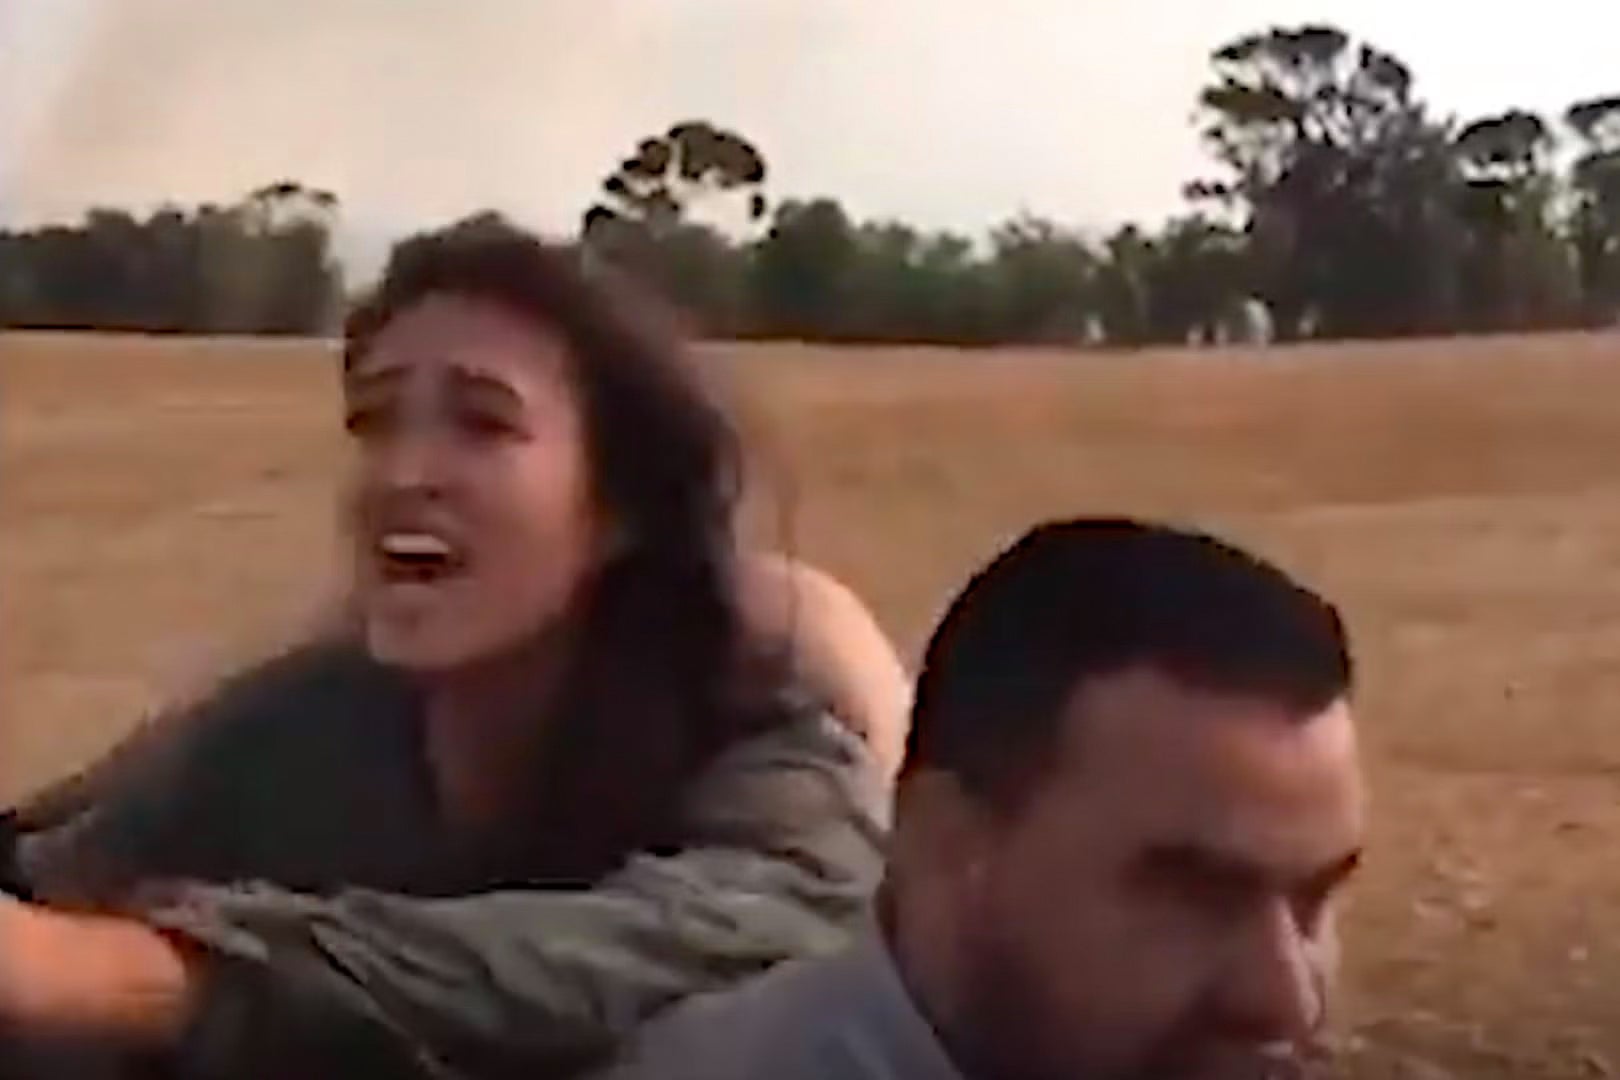 The moment Noa screams for help as she is kidnapped by Hamas fighters